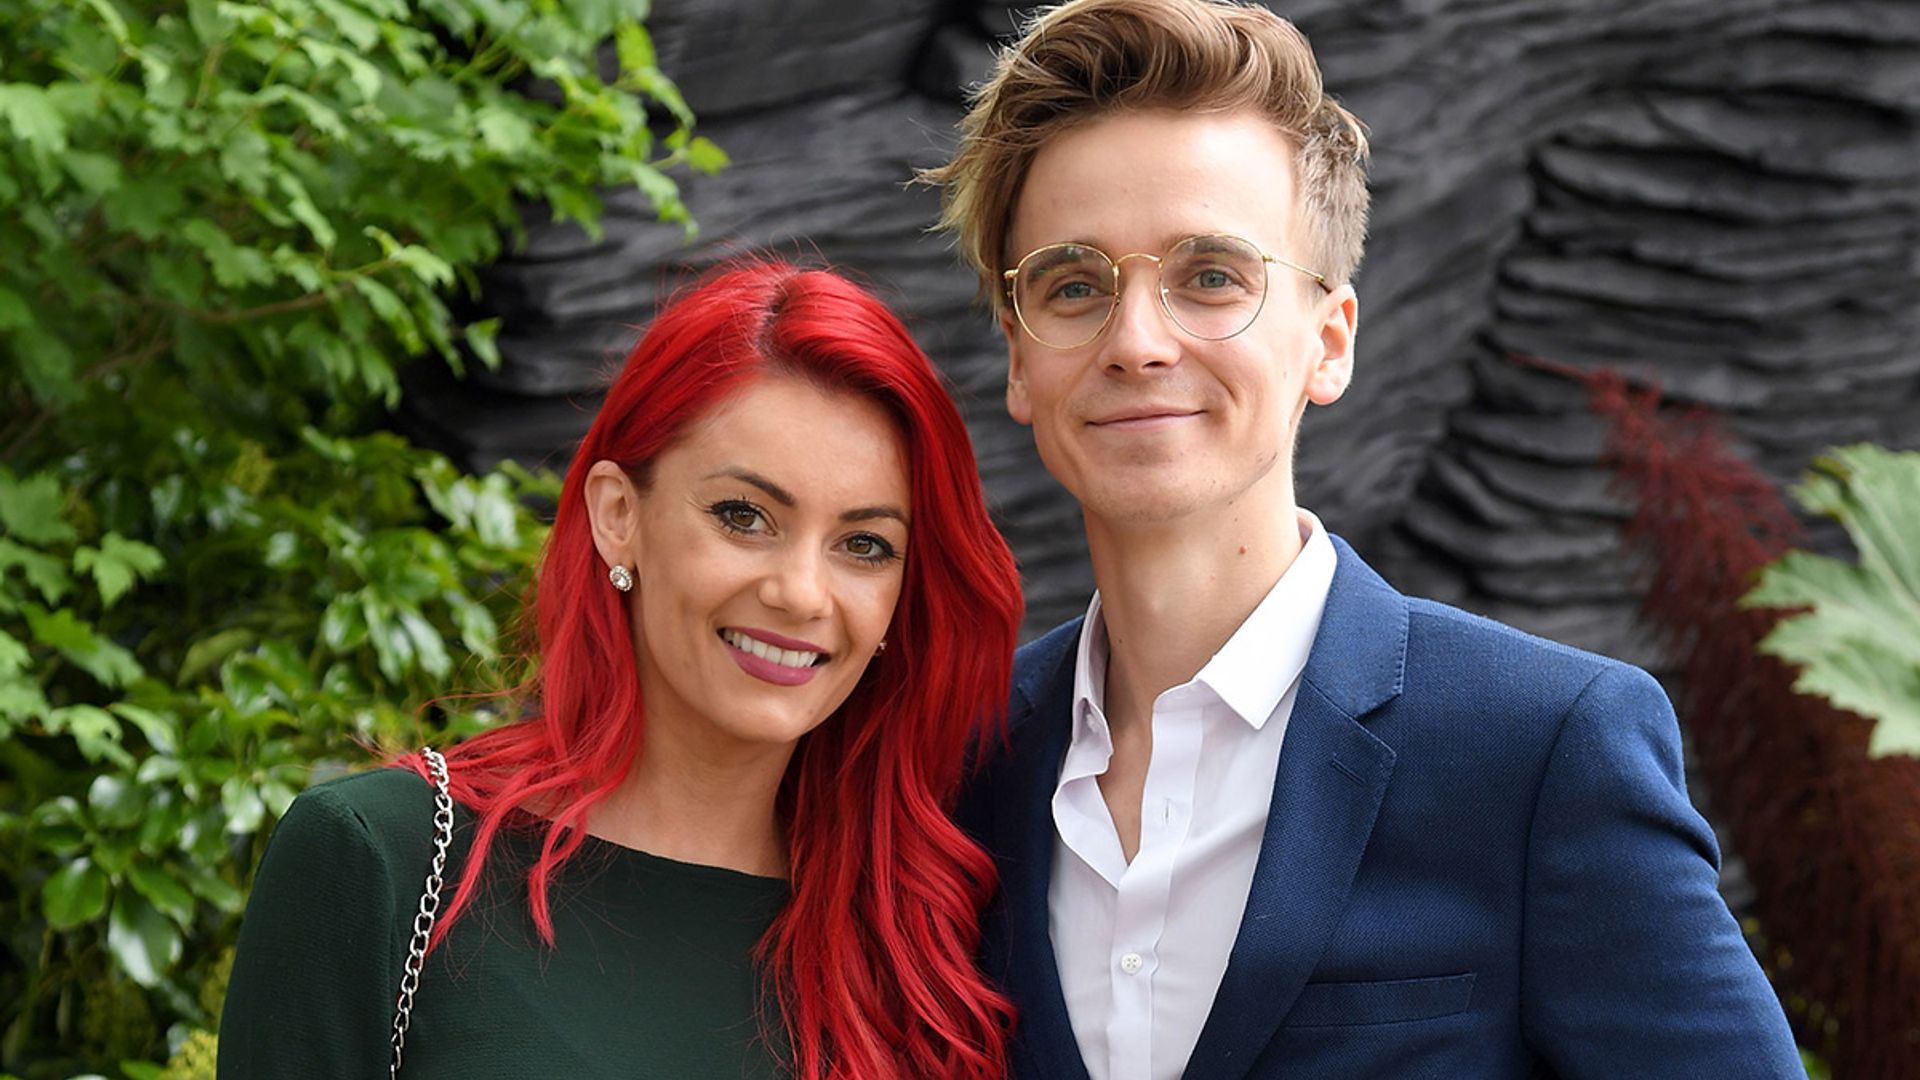 Joe Sugg sends hidden message to Dianne Buswell as he spends Christmas with his family